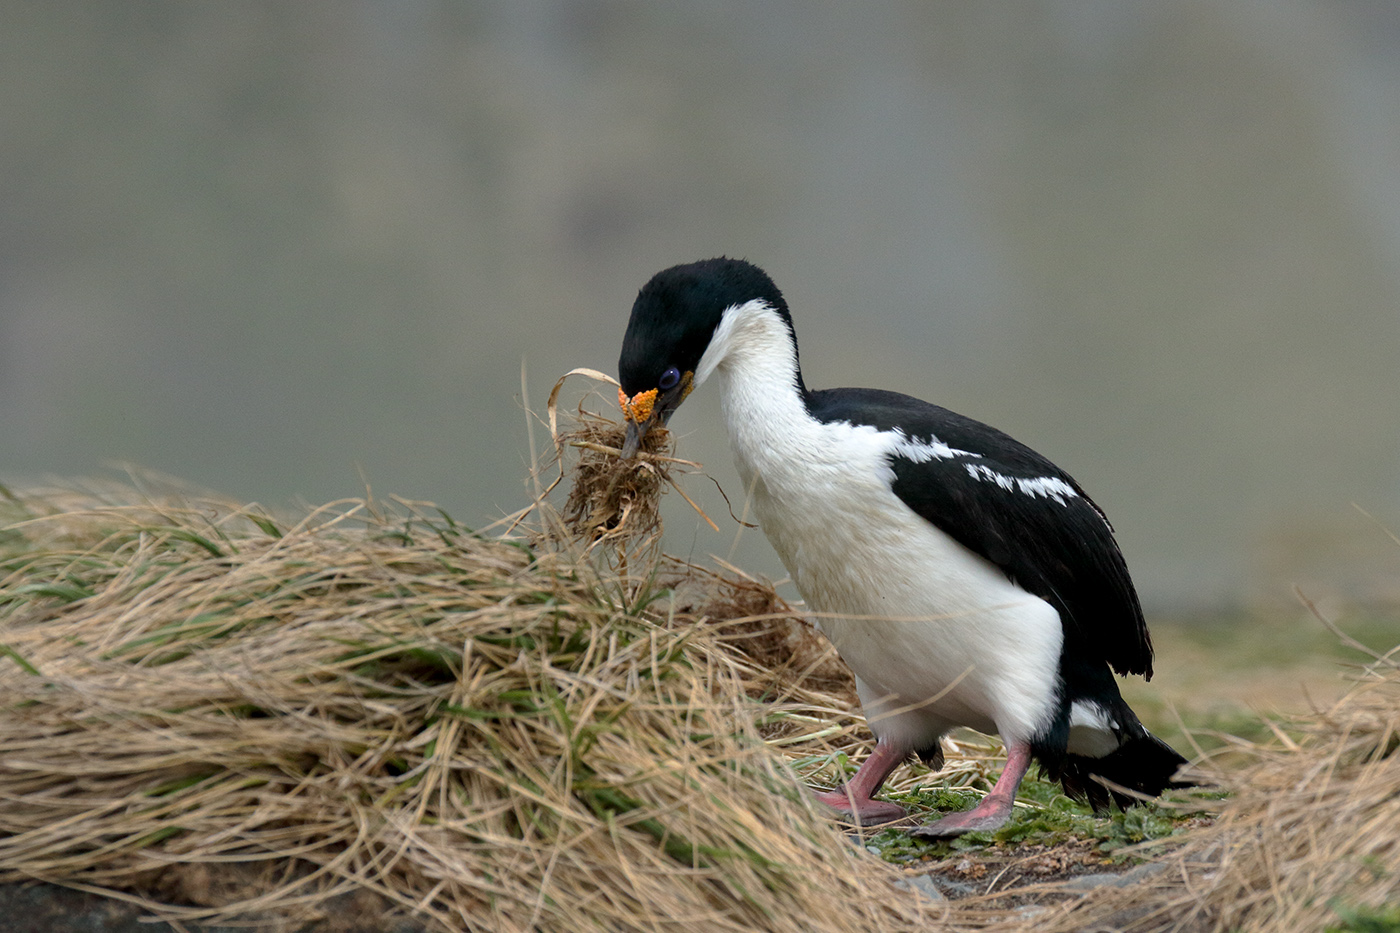 Image of Imperial Shag